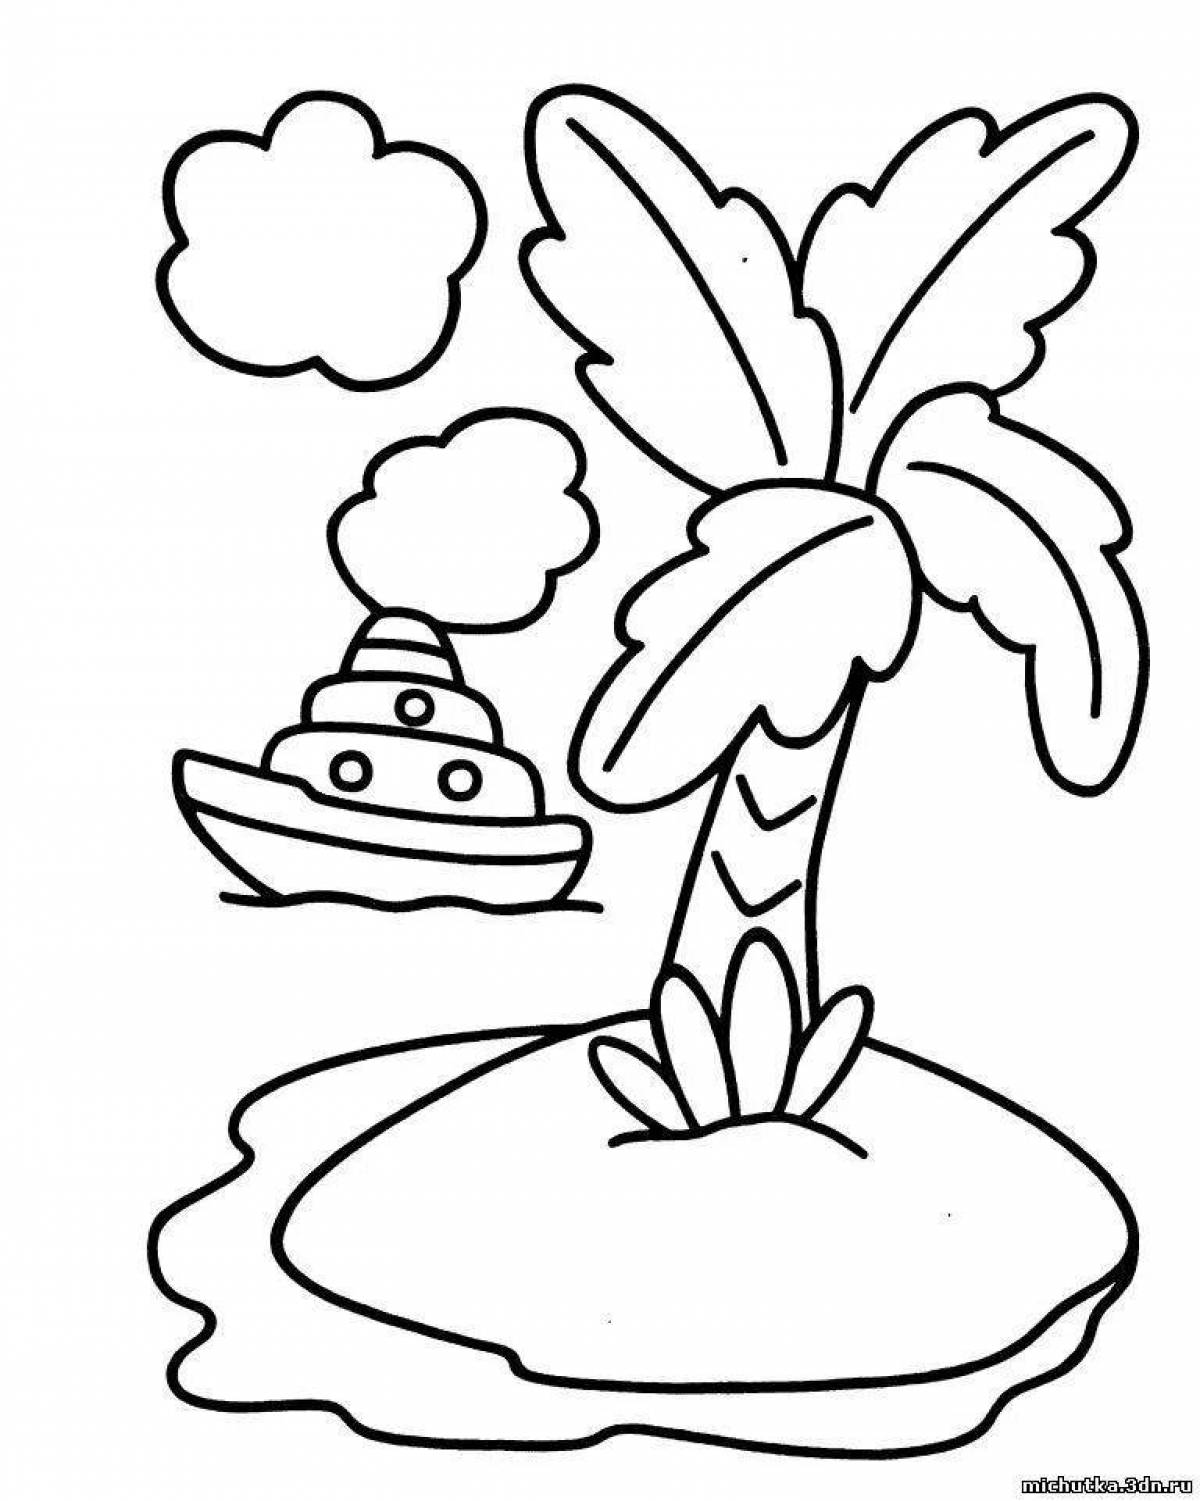 Cute coloring page 4 5